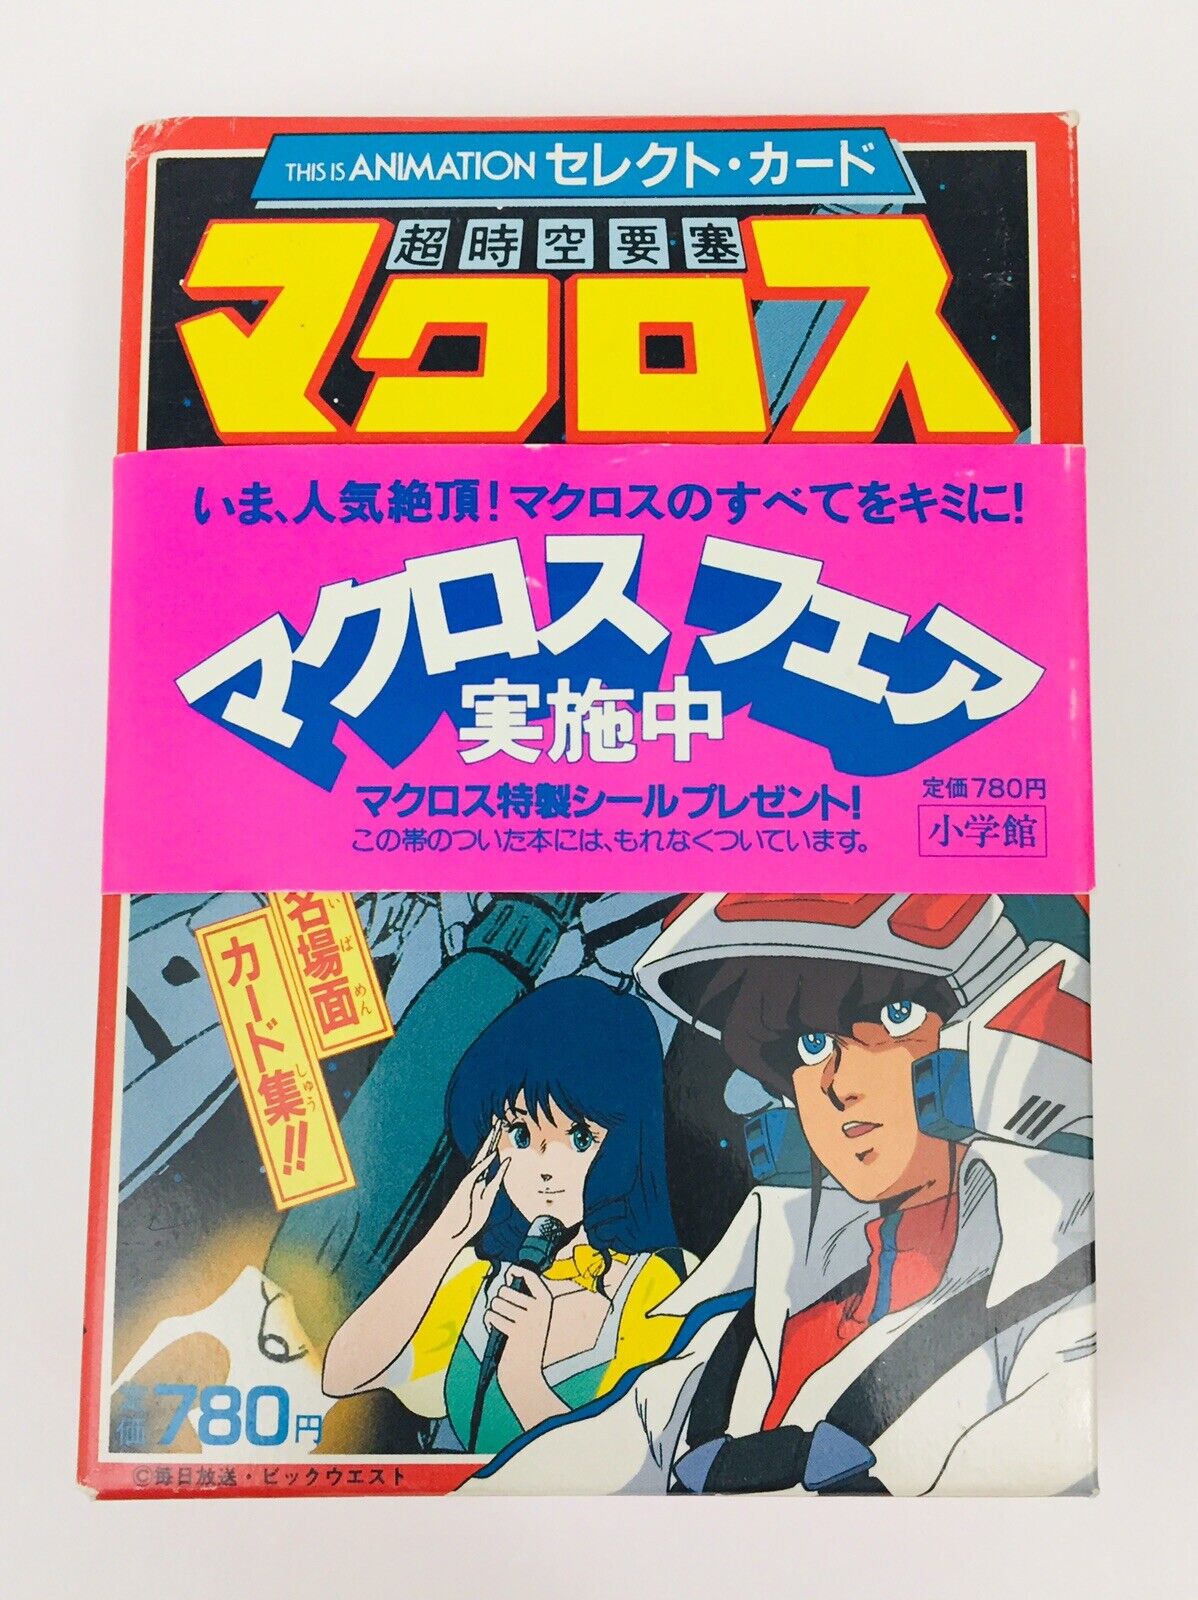 Macross 1983 This Is Animation Photo Book